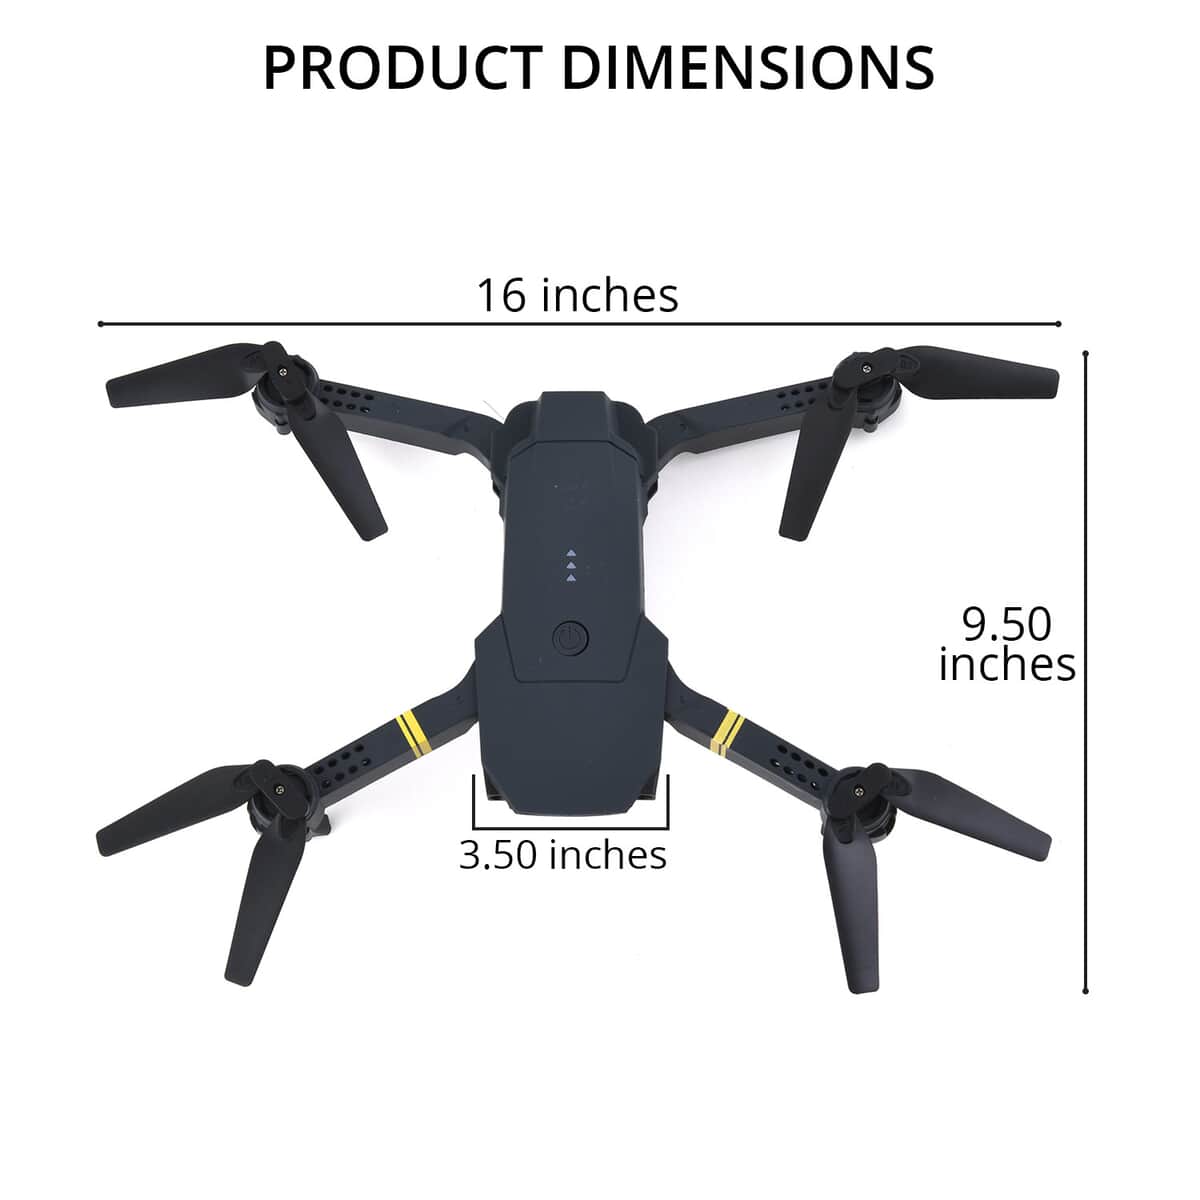 Rechargeable Quadcopter Drone with Built-in Camera, Wi-Fi Capability and Remote Control image number 3